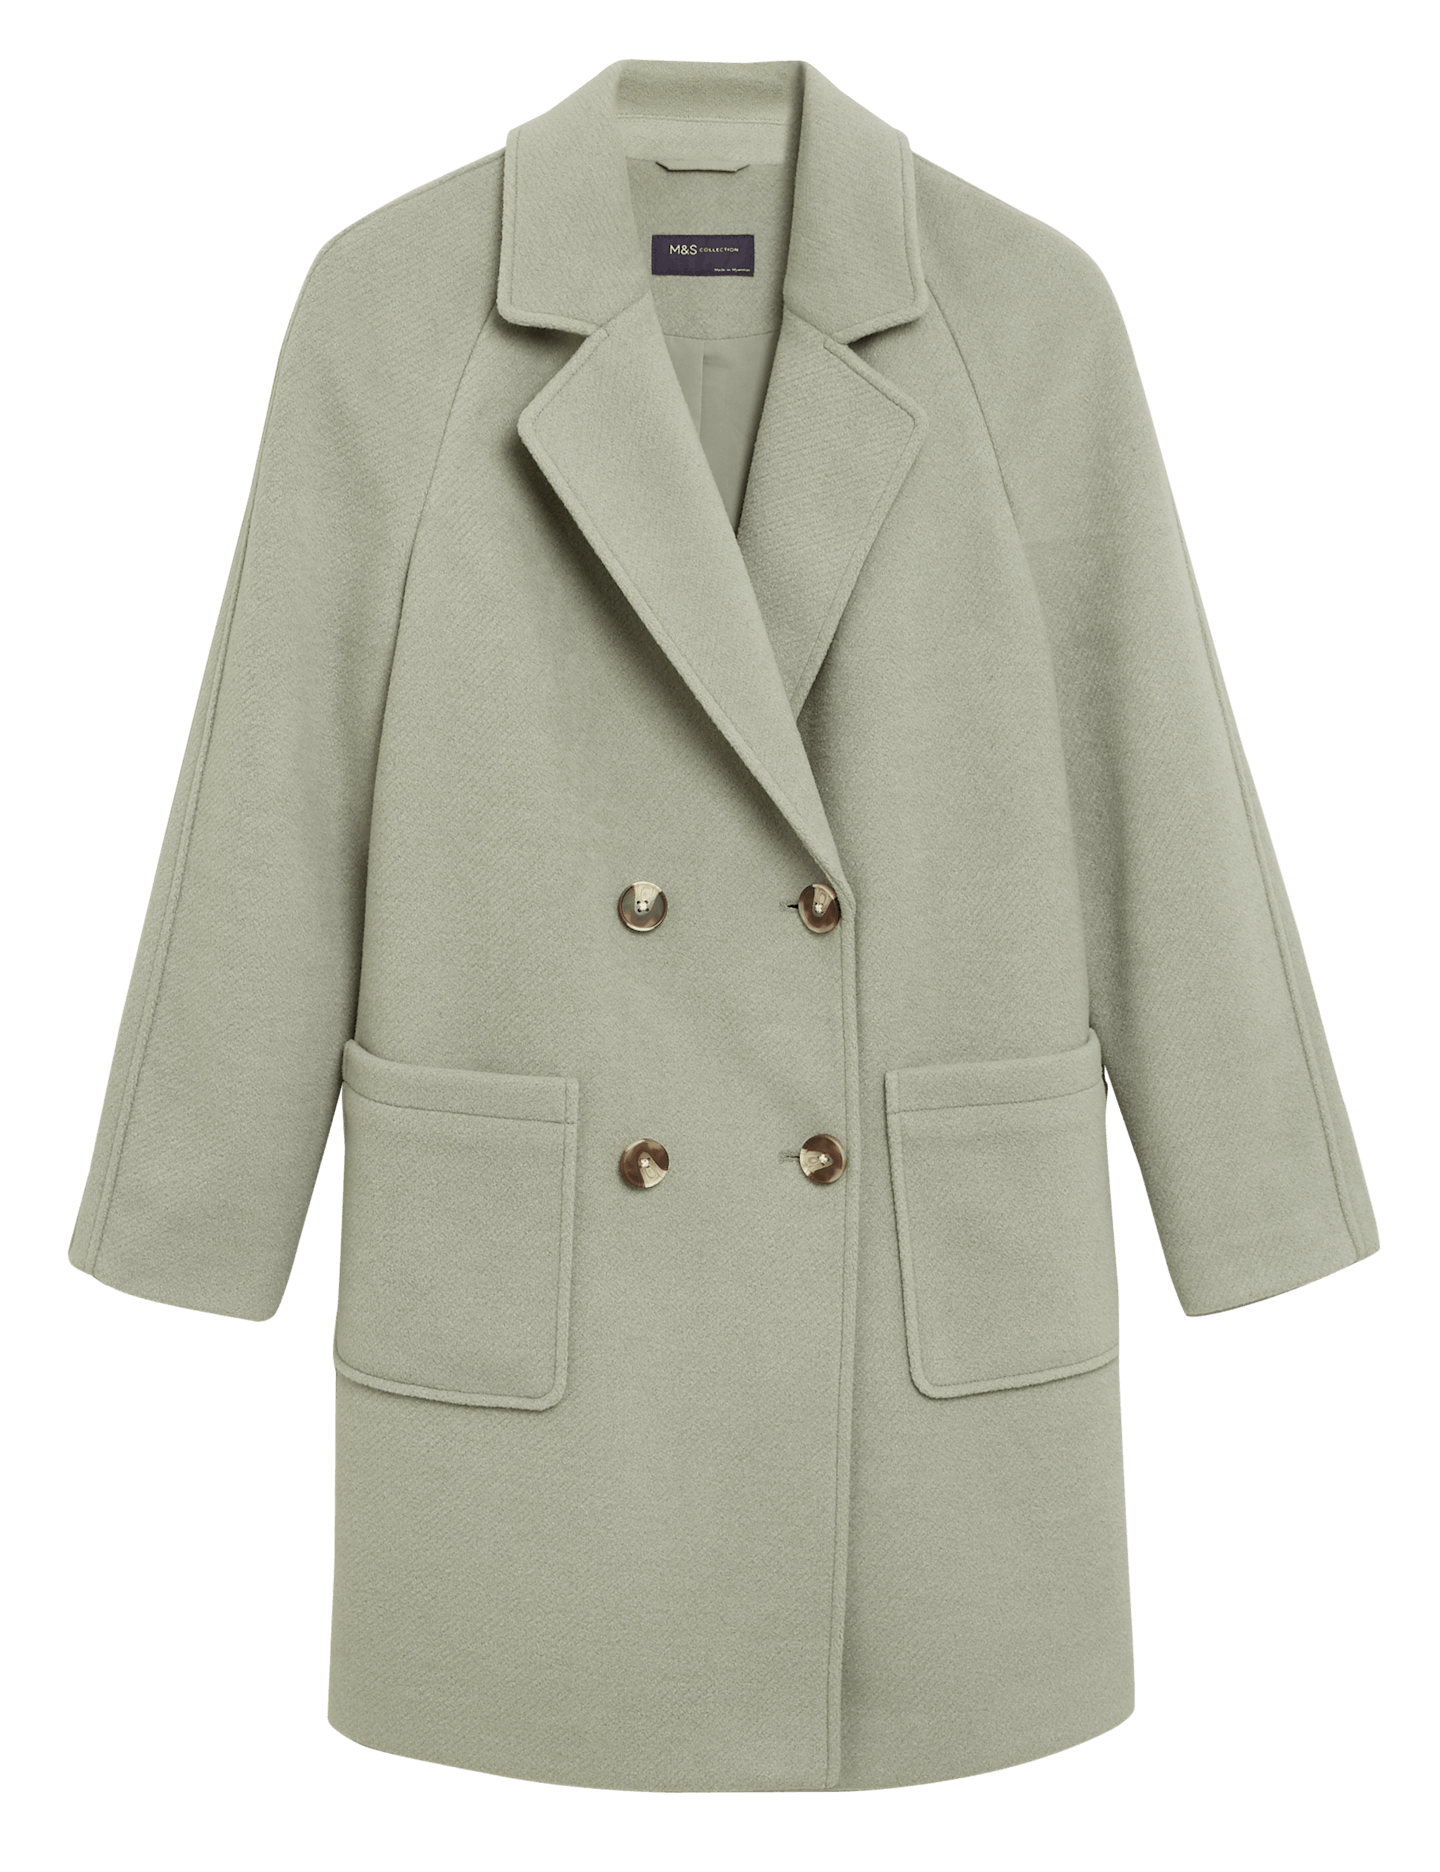 Holly Willoughby's Sell-Out Spring Coat Is From M&S – Grazia